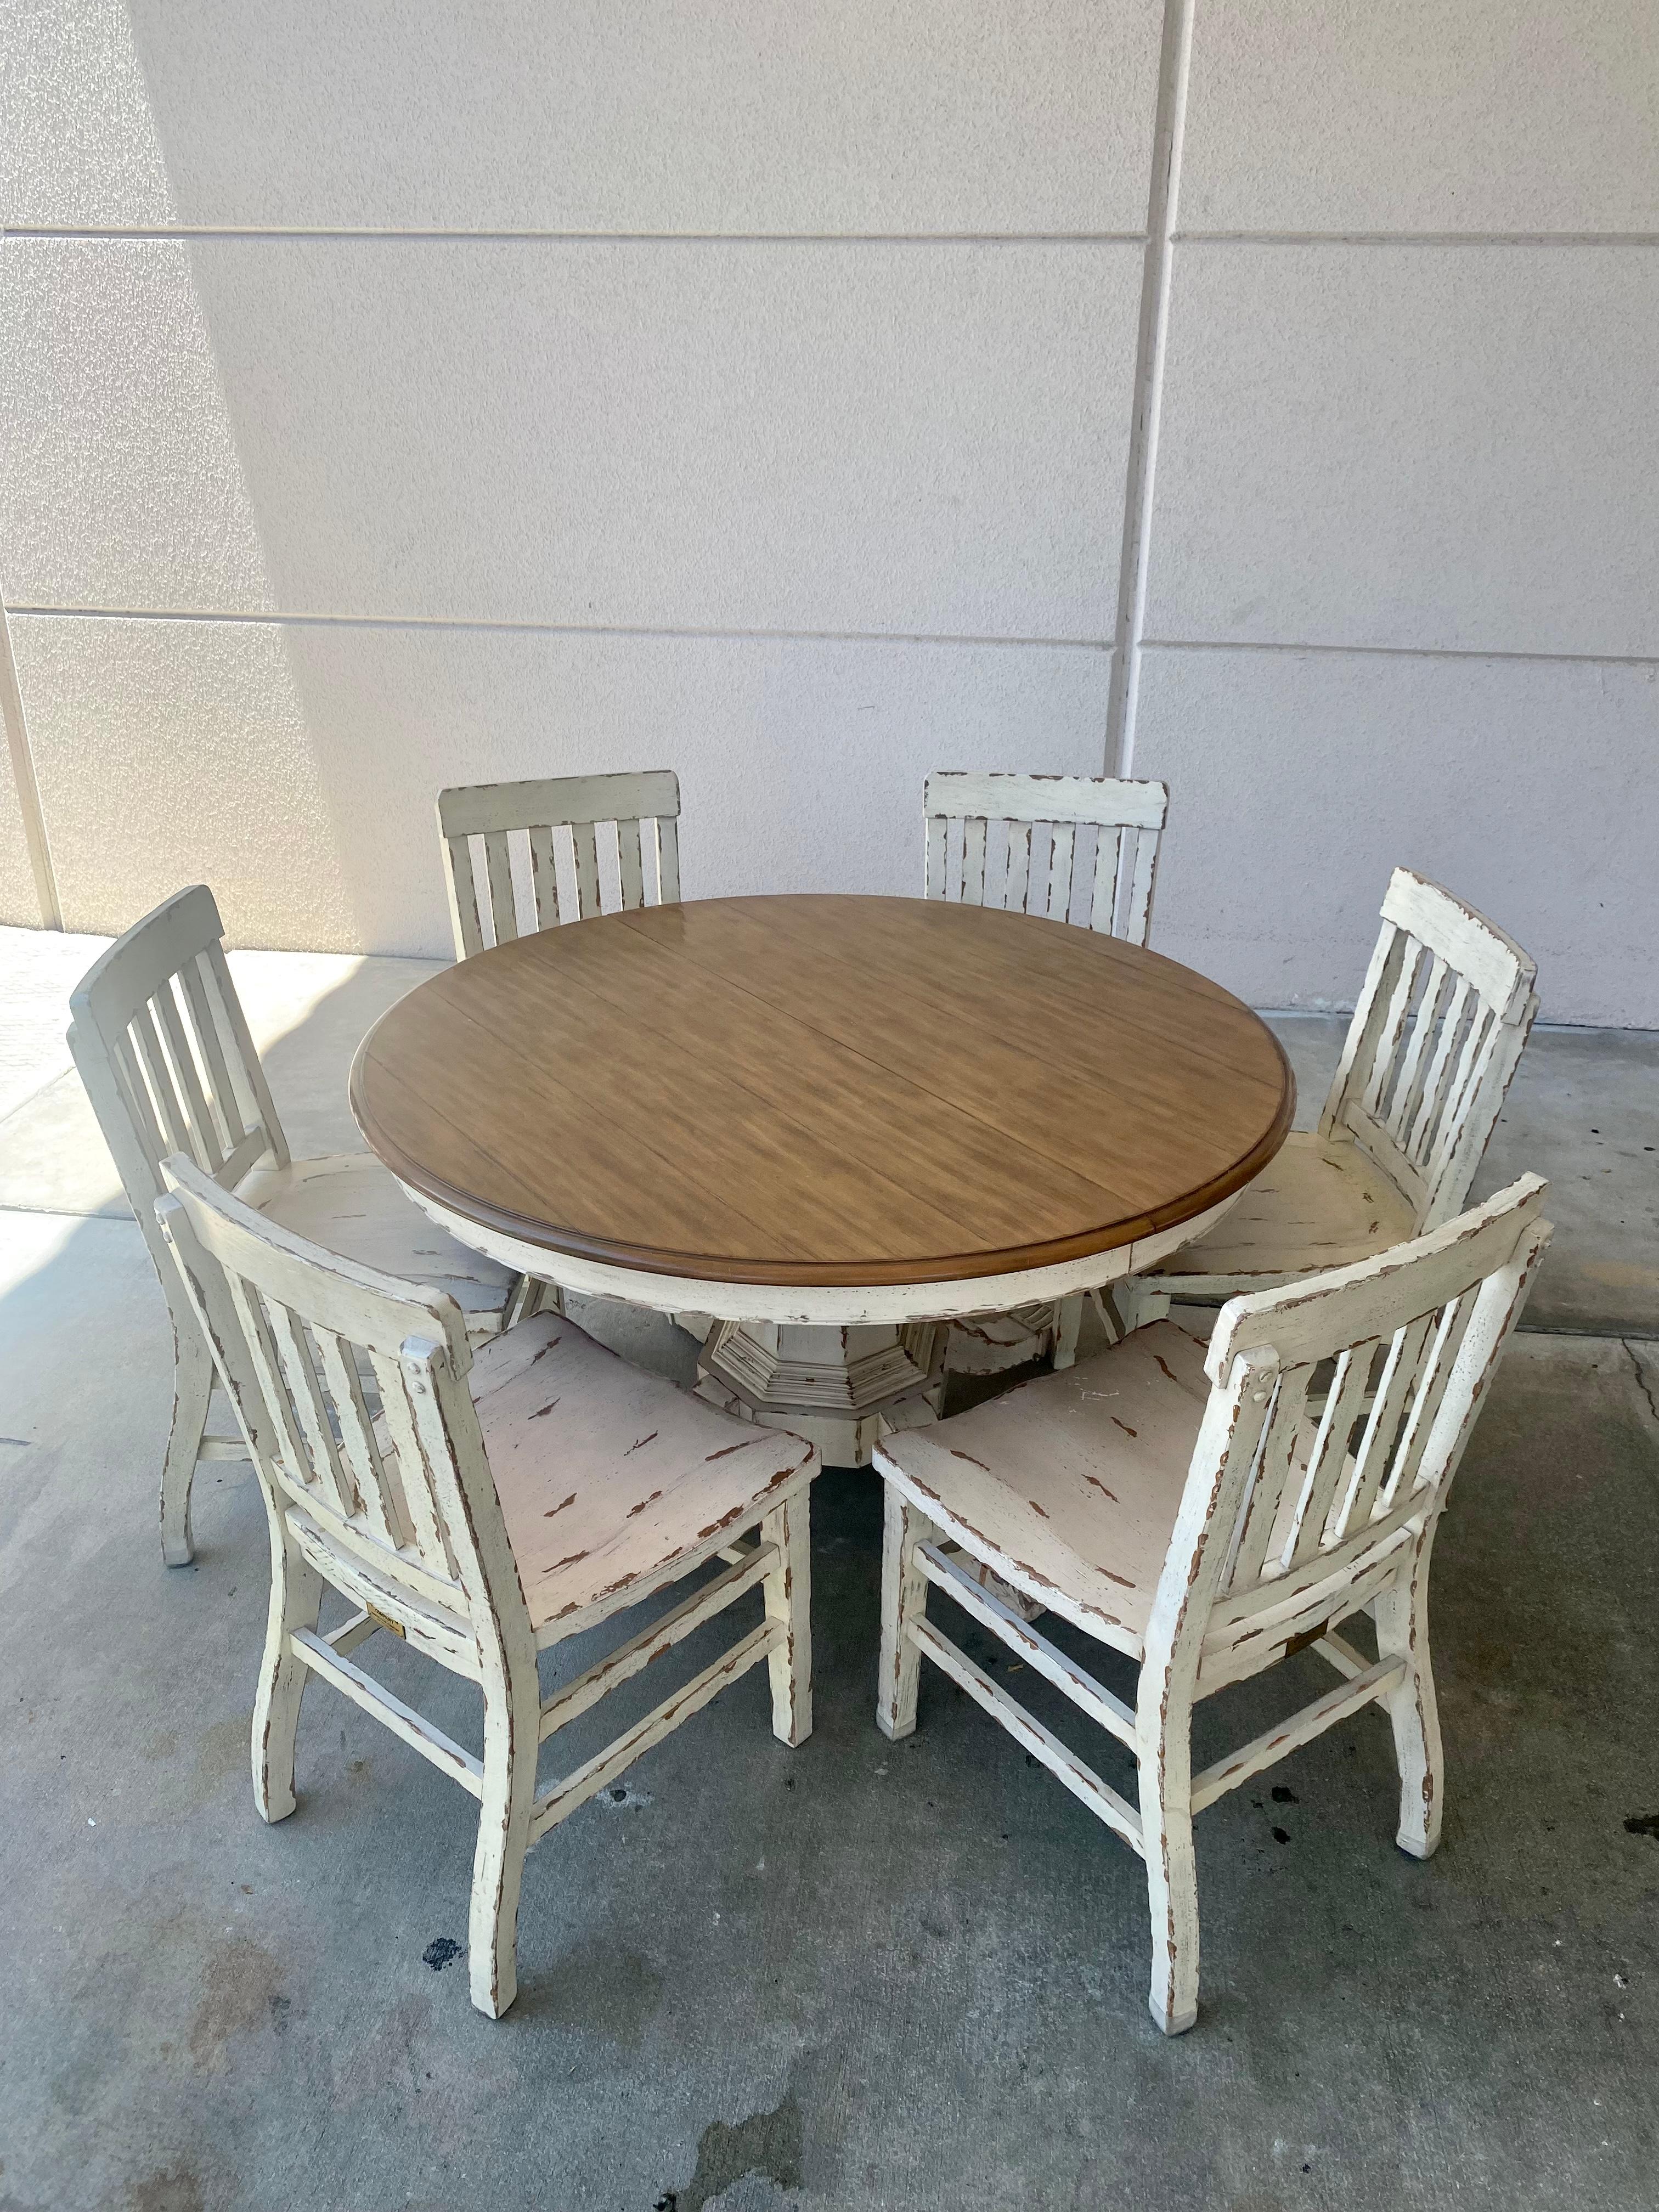 The extremely rare Ralph Lauren dining set is statement piece which is also comfortable and packed with personality! Just look at the details and sculptural shape on this beauty! Just stunning, but then your eyes are immediately drawn to the carved